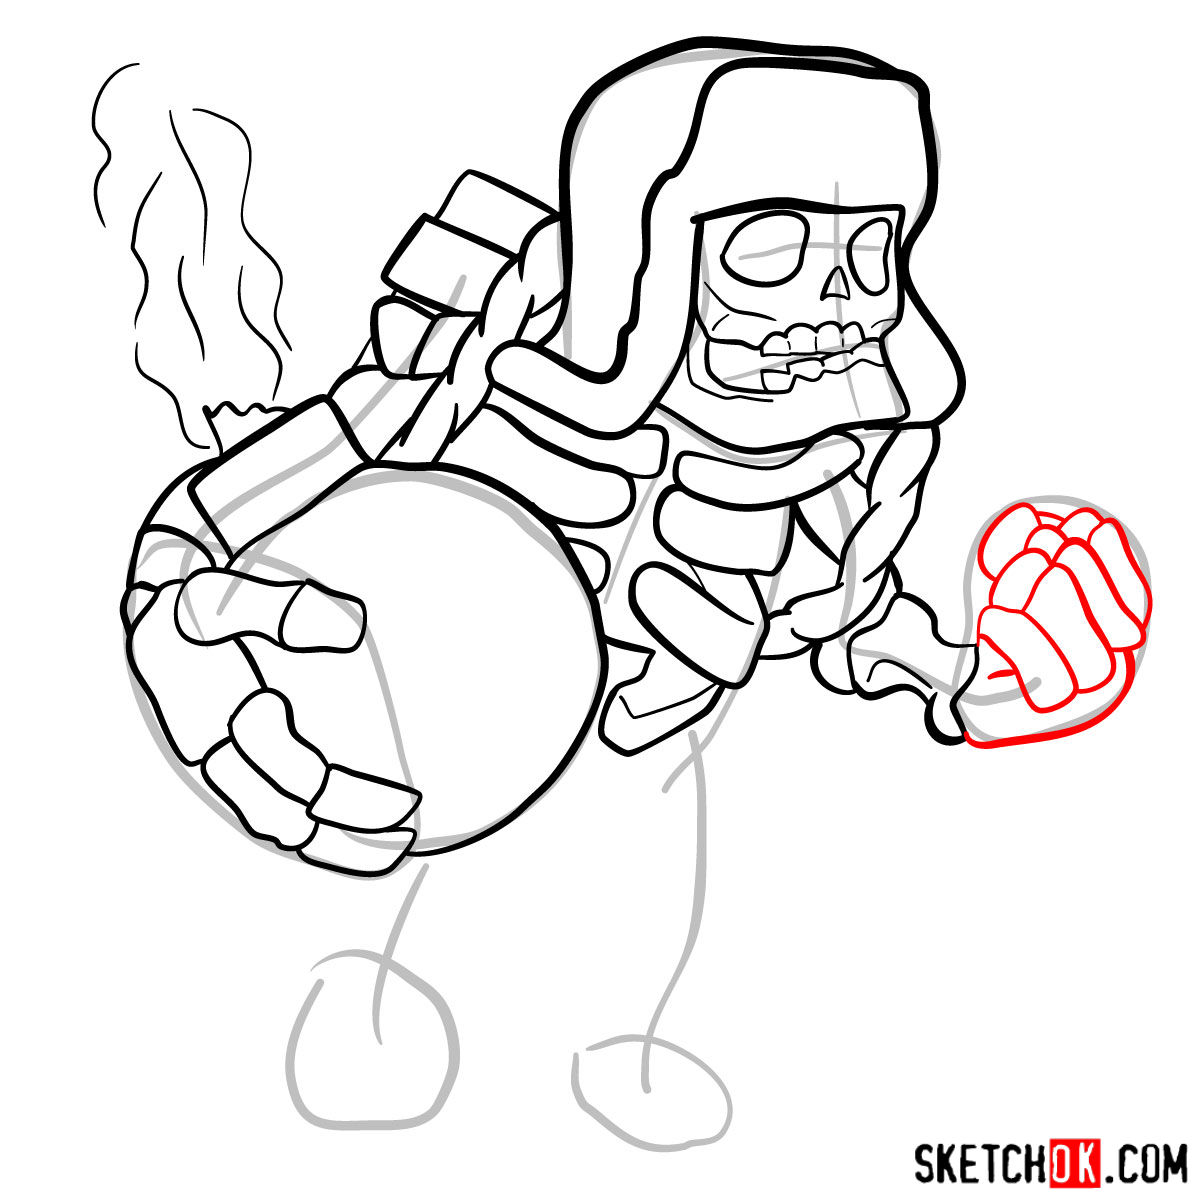 How to draw Giant Skeleton from Clash of Clans - step 09